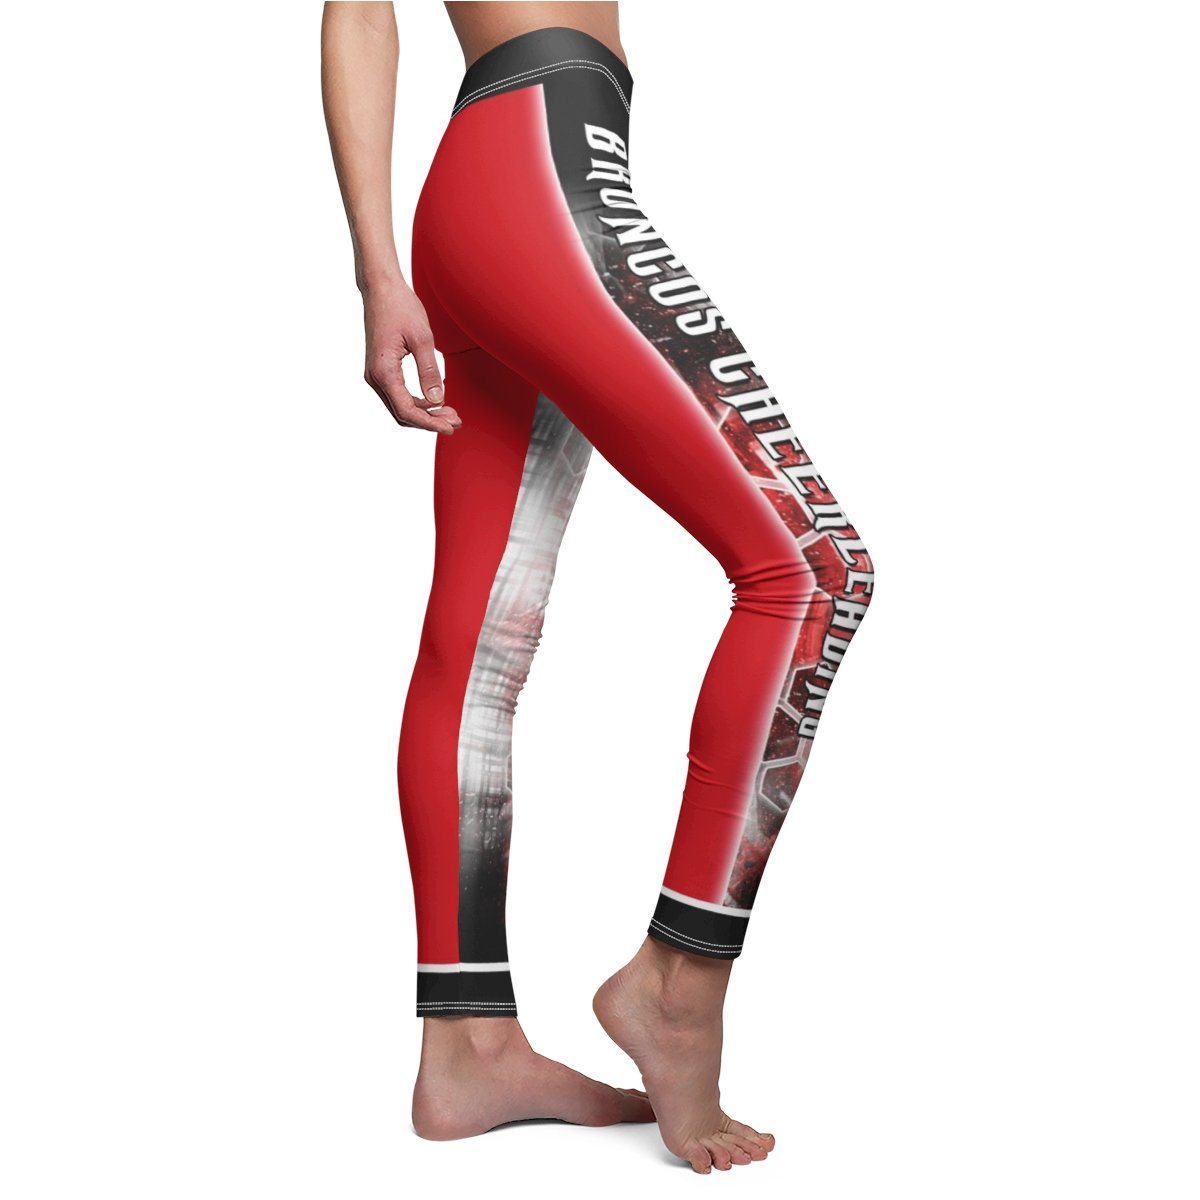 Honeycomb - V.5 - Extreme Sportswear Cut & Sew Leggings Template-Photoshop Template - Photo Solutions